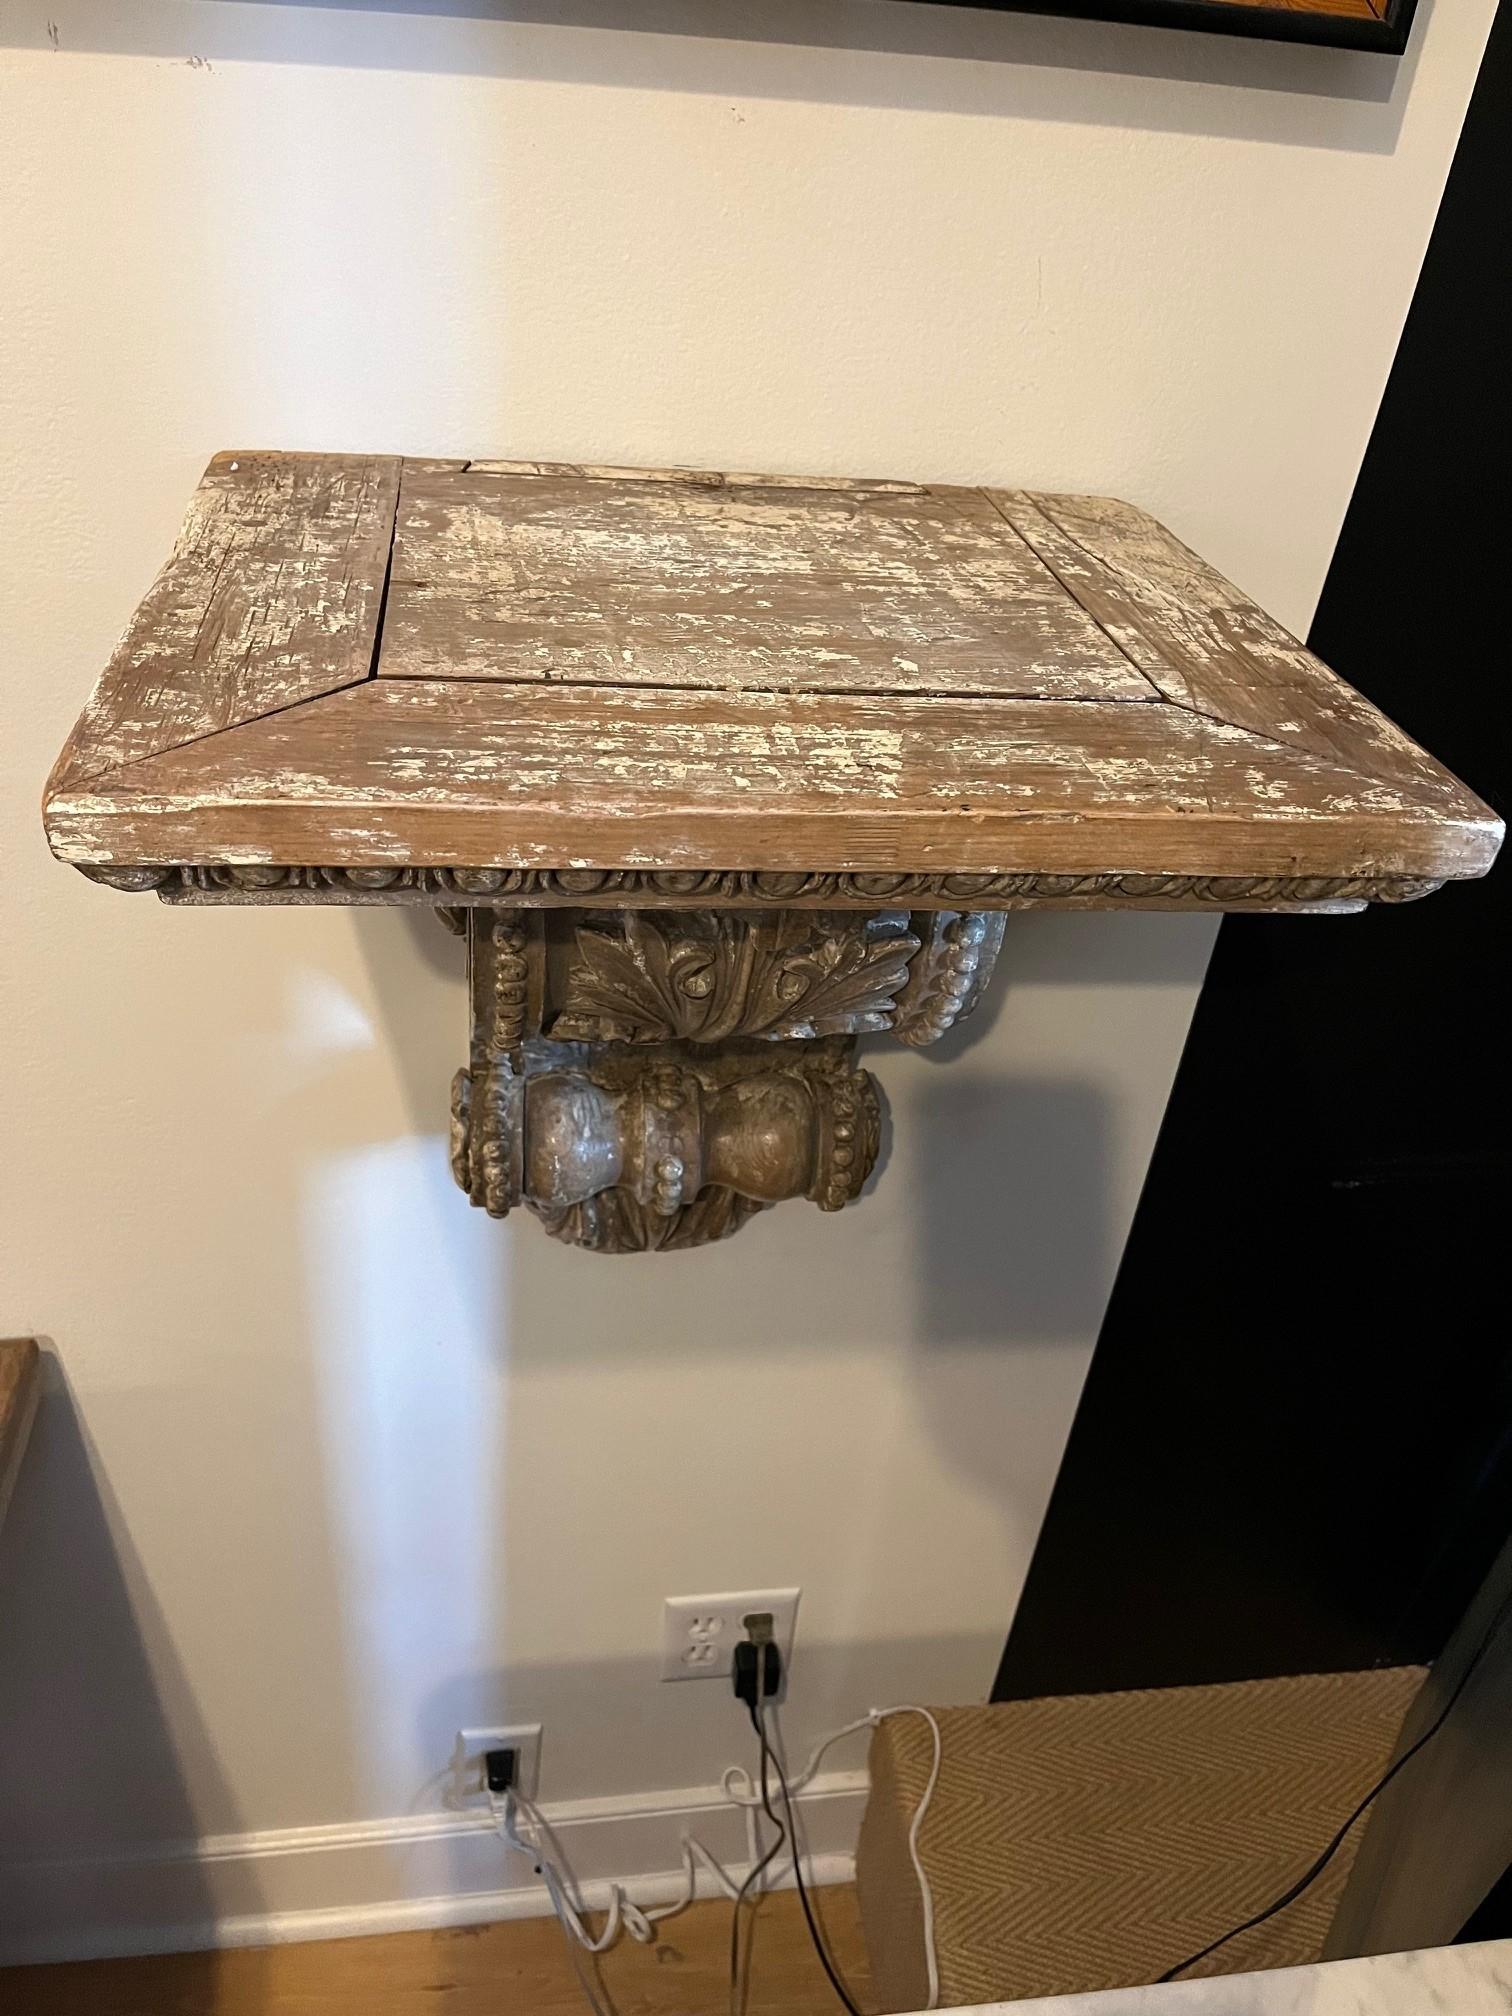 19th Century Wooden Corbel, Wall Bracket Intricately Carved and Detailed with Beads, Acanthus Leaf, and Egg and Dart Detailing